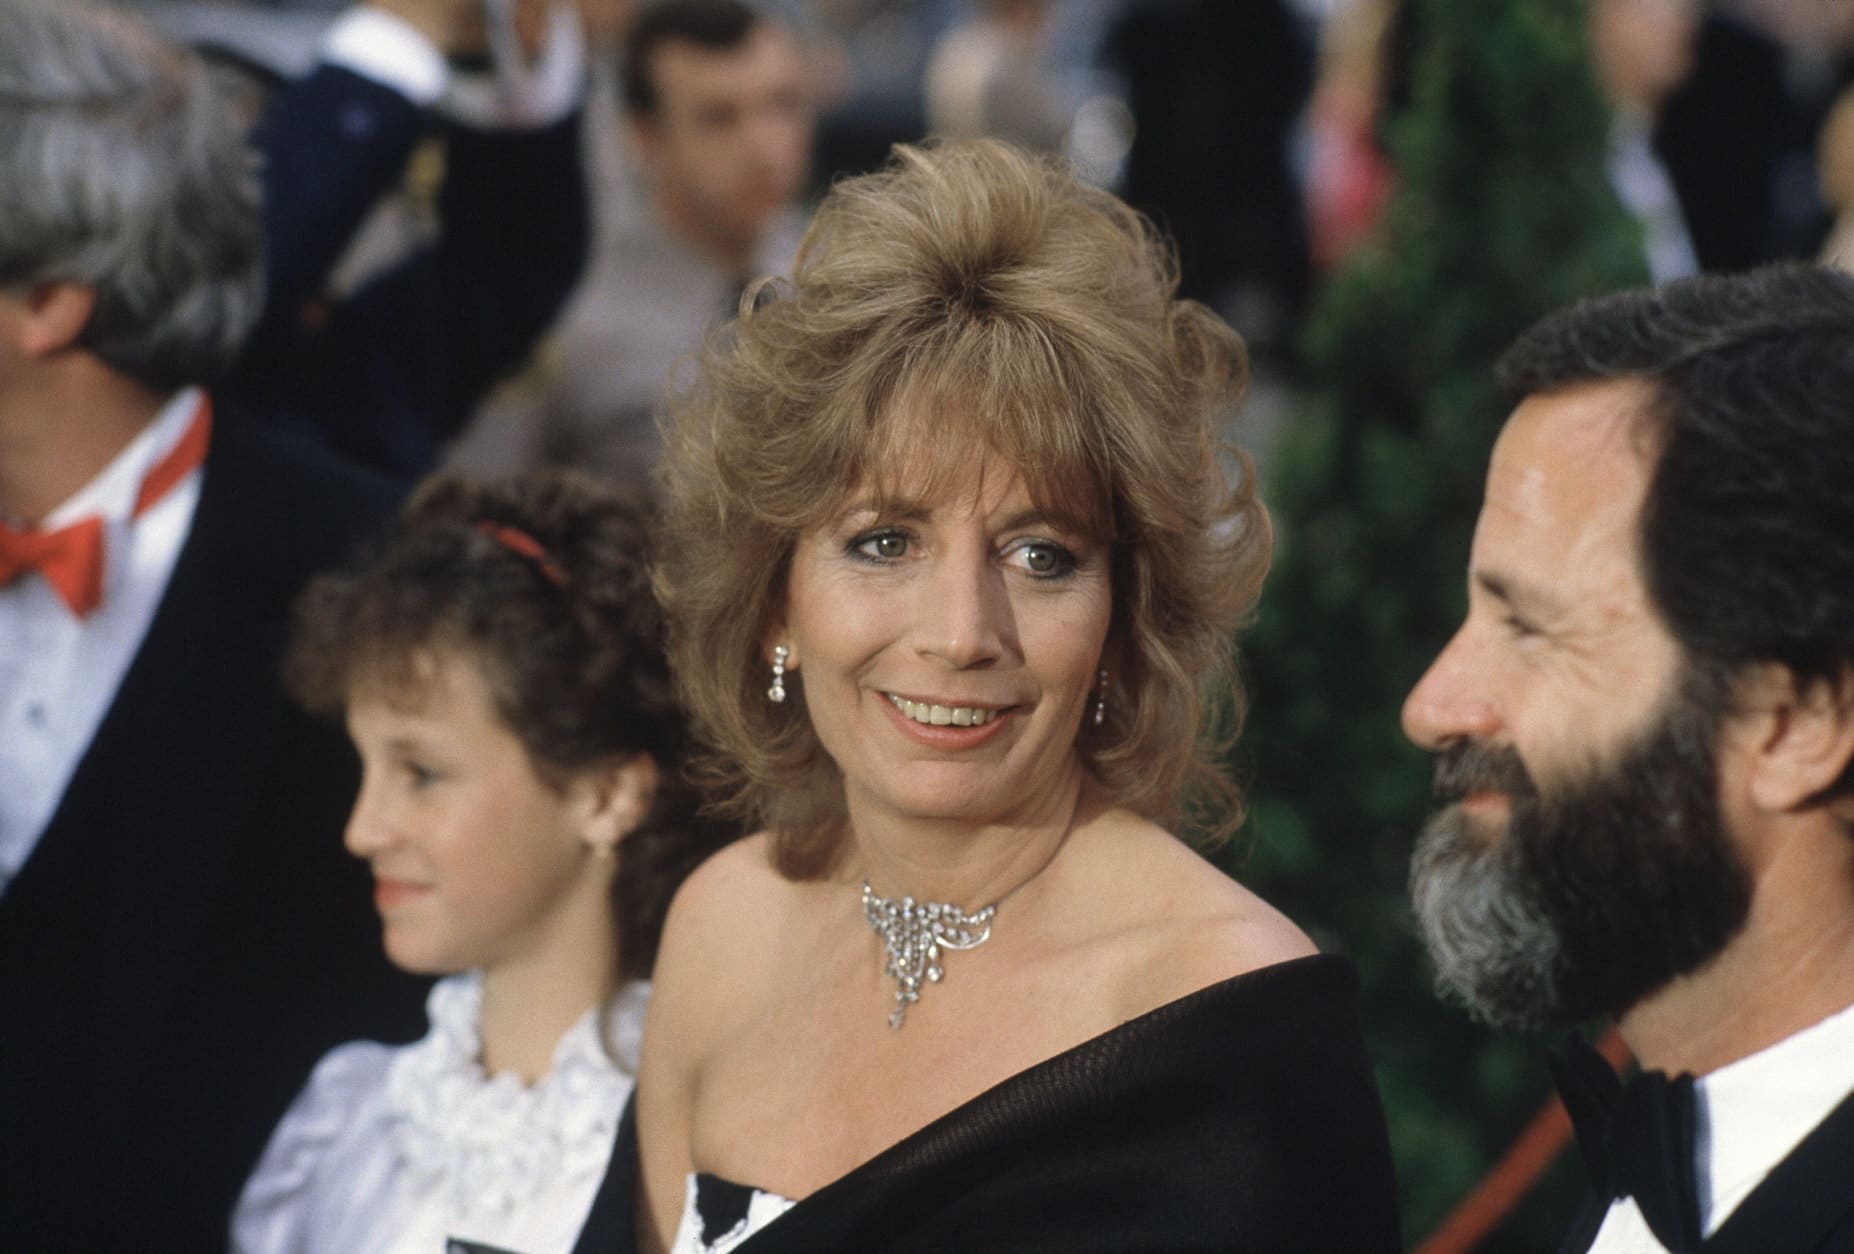 Actress Penny Marshall arrives for the 56th Annual Academy Awards in Los Angeles, April 9, 1984. (AP Photo/Reed Saxon)